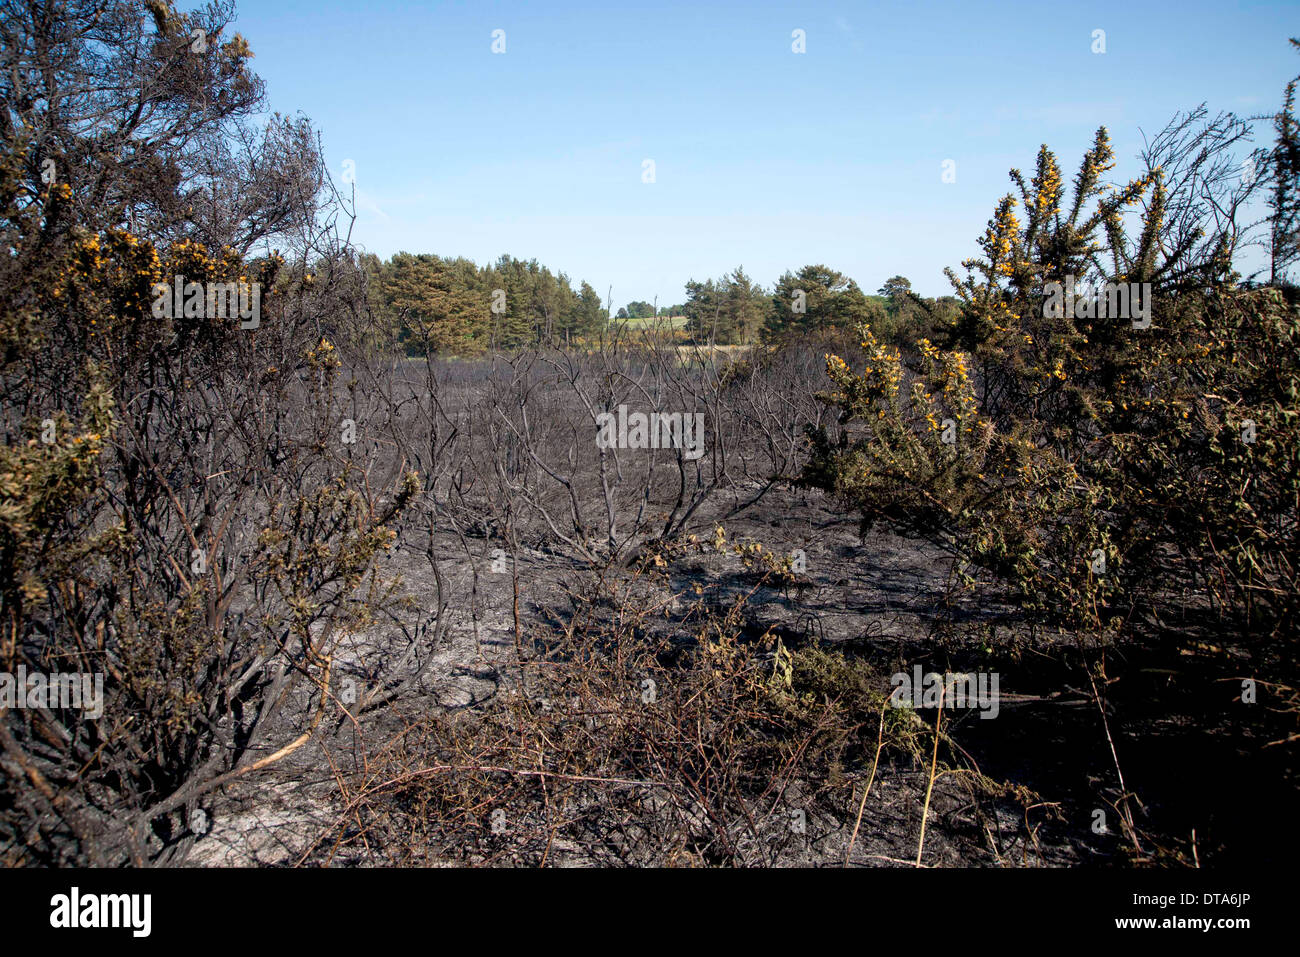 aftermath of a wild fire showing burnt gorse, grass etc. against a blue sky. Stock Photo